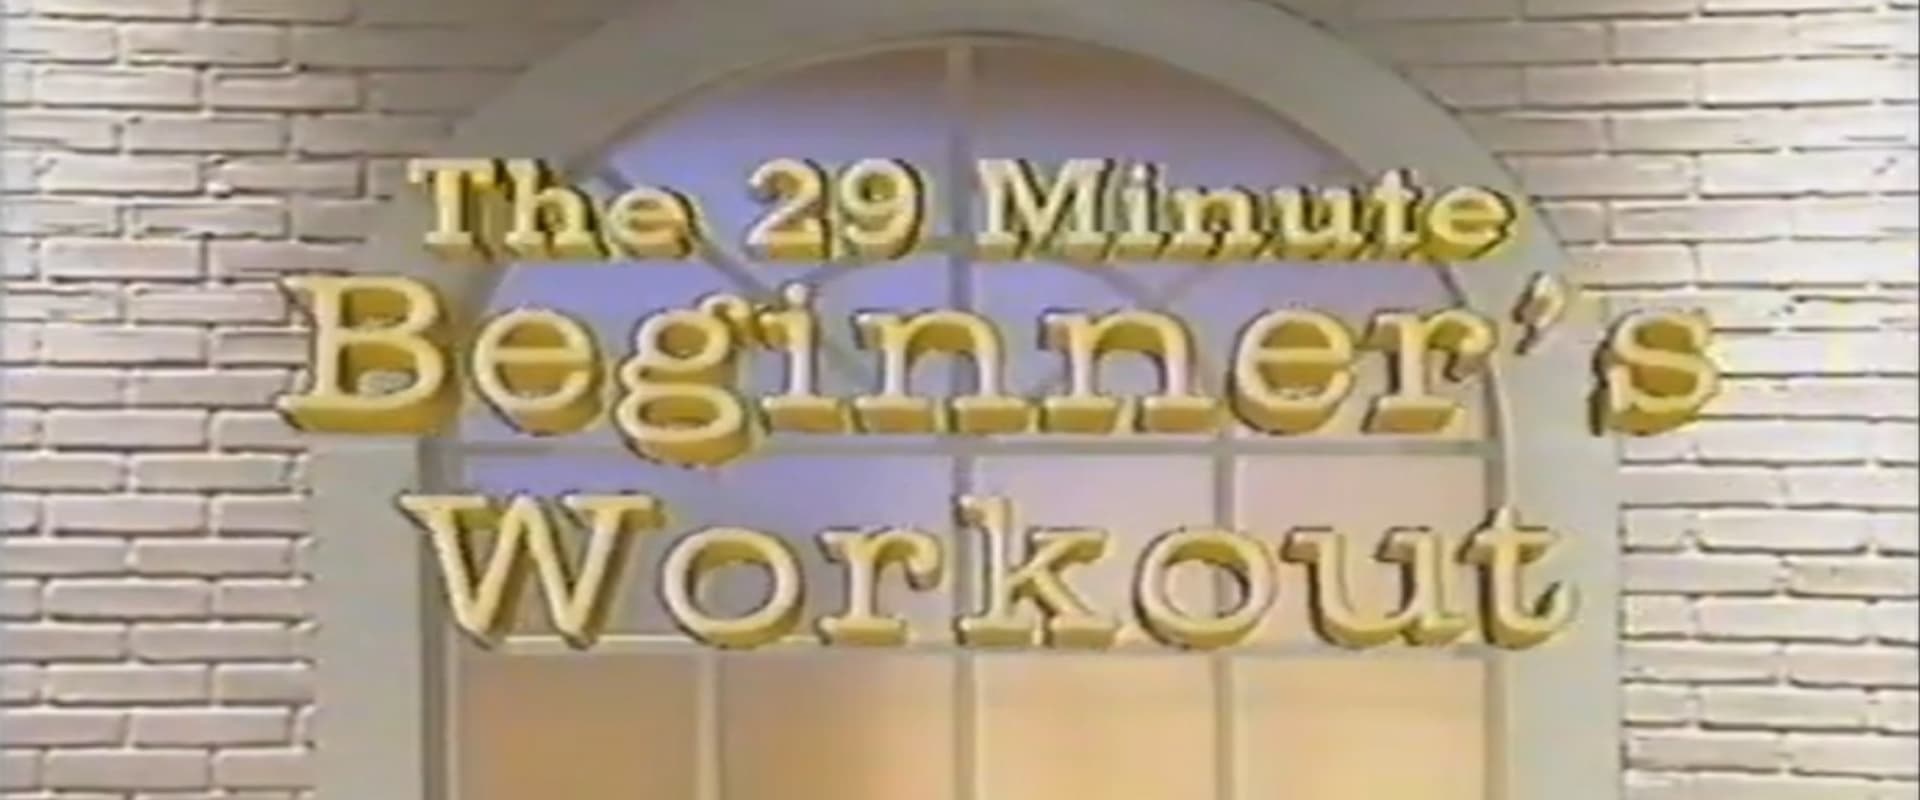 29 Minute Beginners Workout